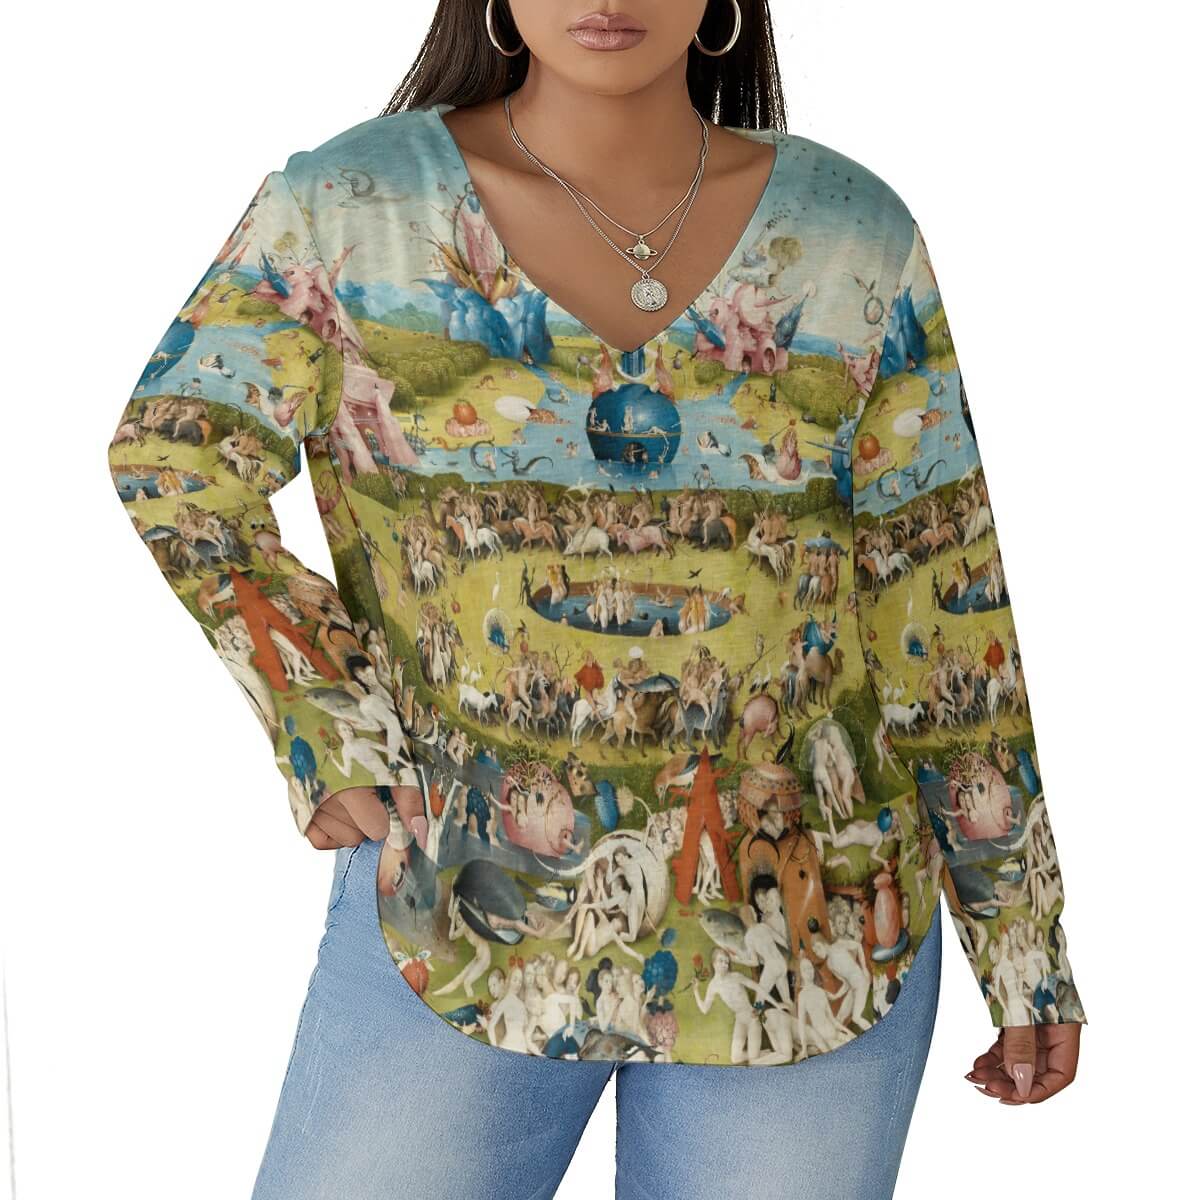 Hieronymus Bosch Earthly Delights T-shirt Plus Size